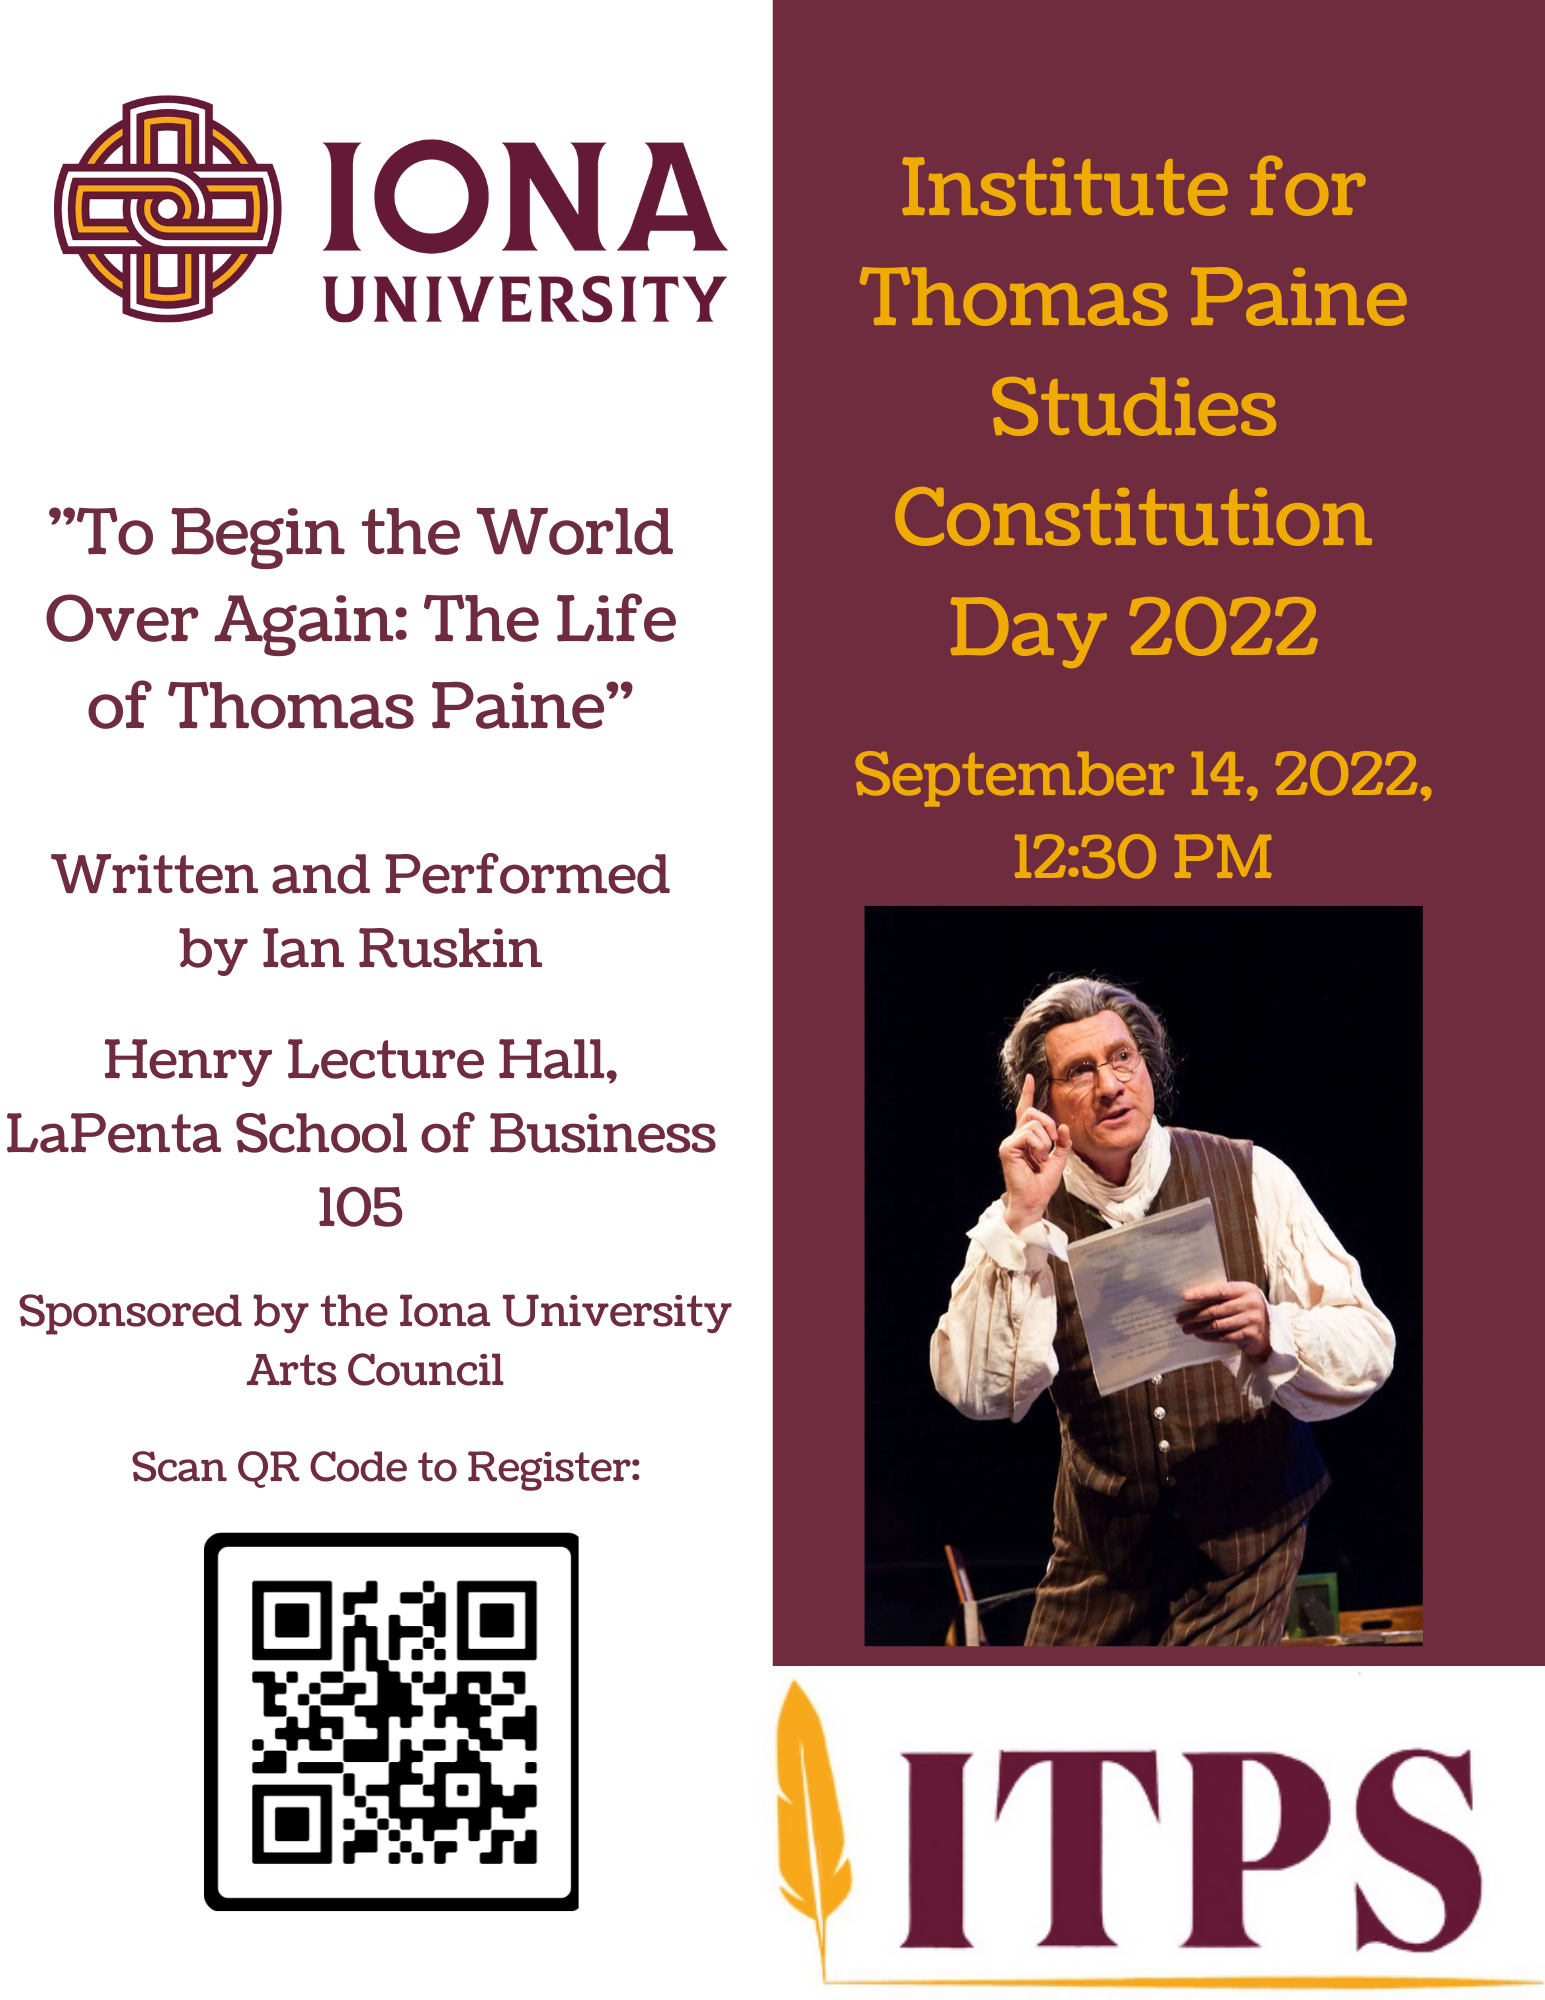 ITPS Constitution Day 2022 Flyer .png